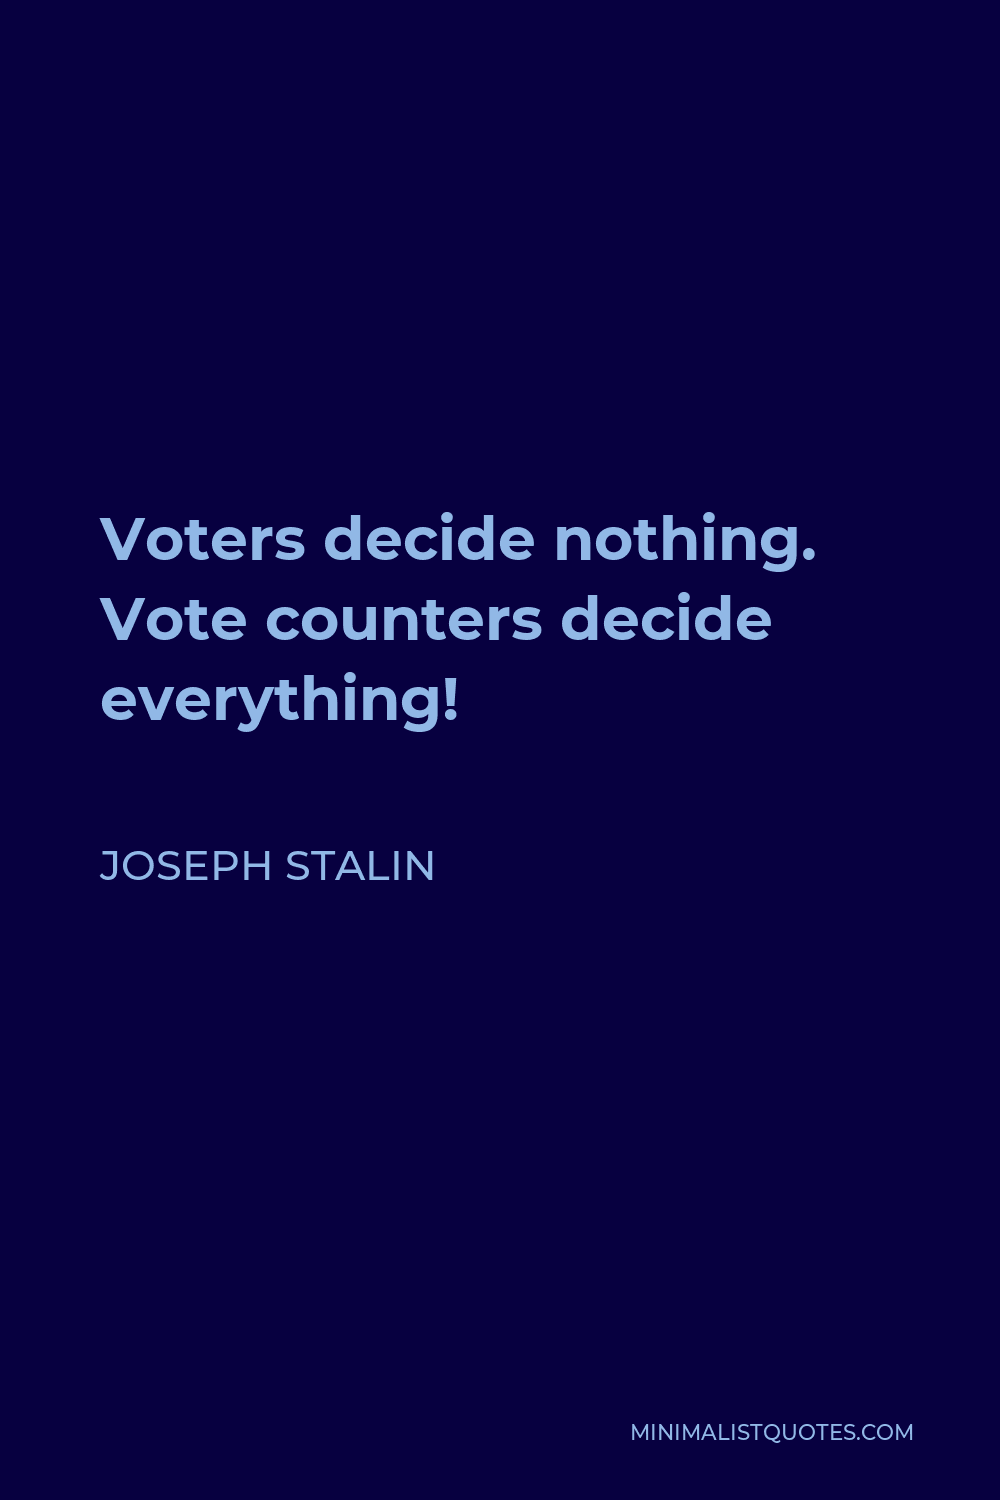 Joseph Stalin Quote - Voters decide nothing. Vote counters decide everything!